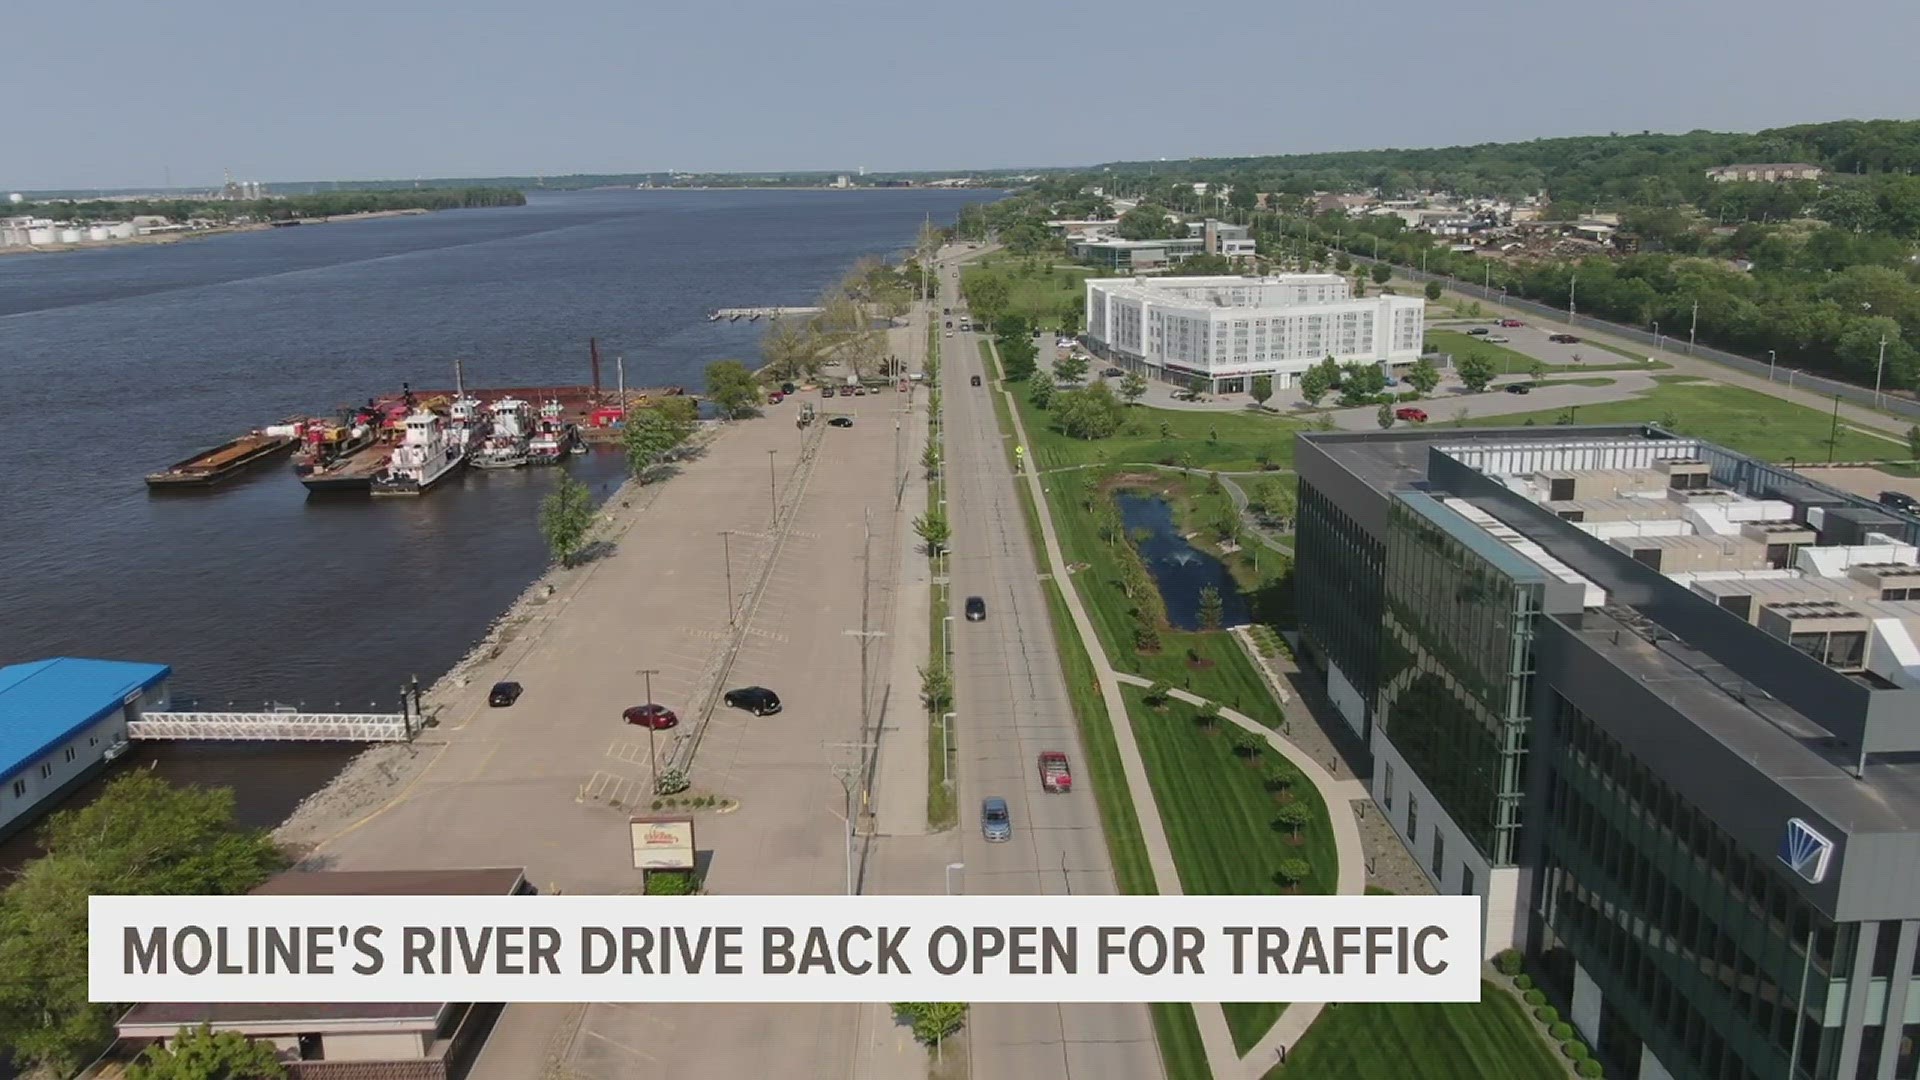 Crews finished cleaning up the road after the entire riverfront was closed for weeks due to flooding.